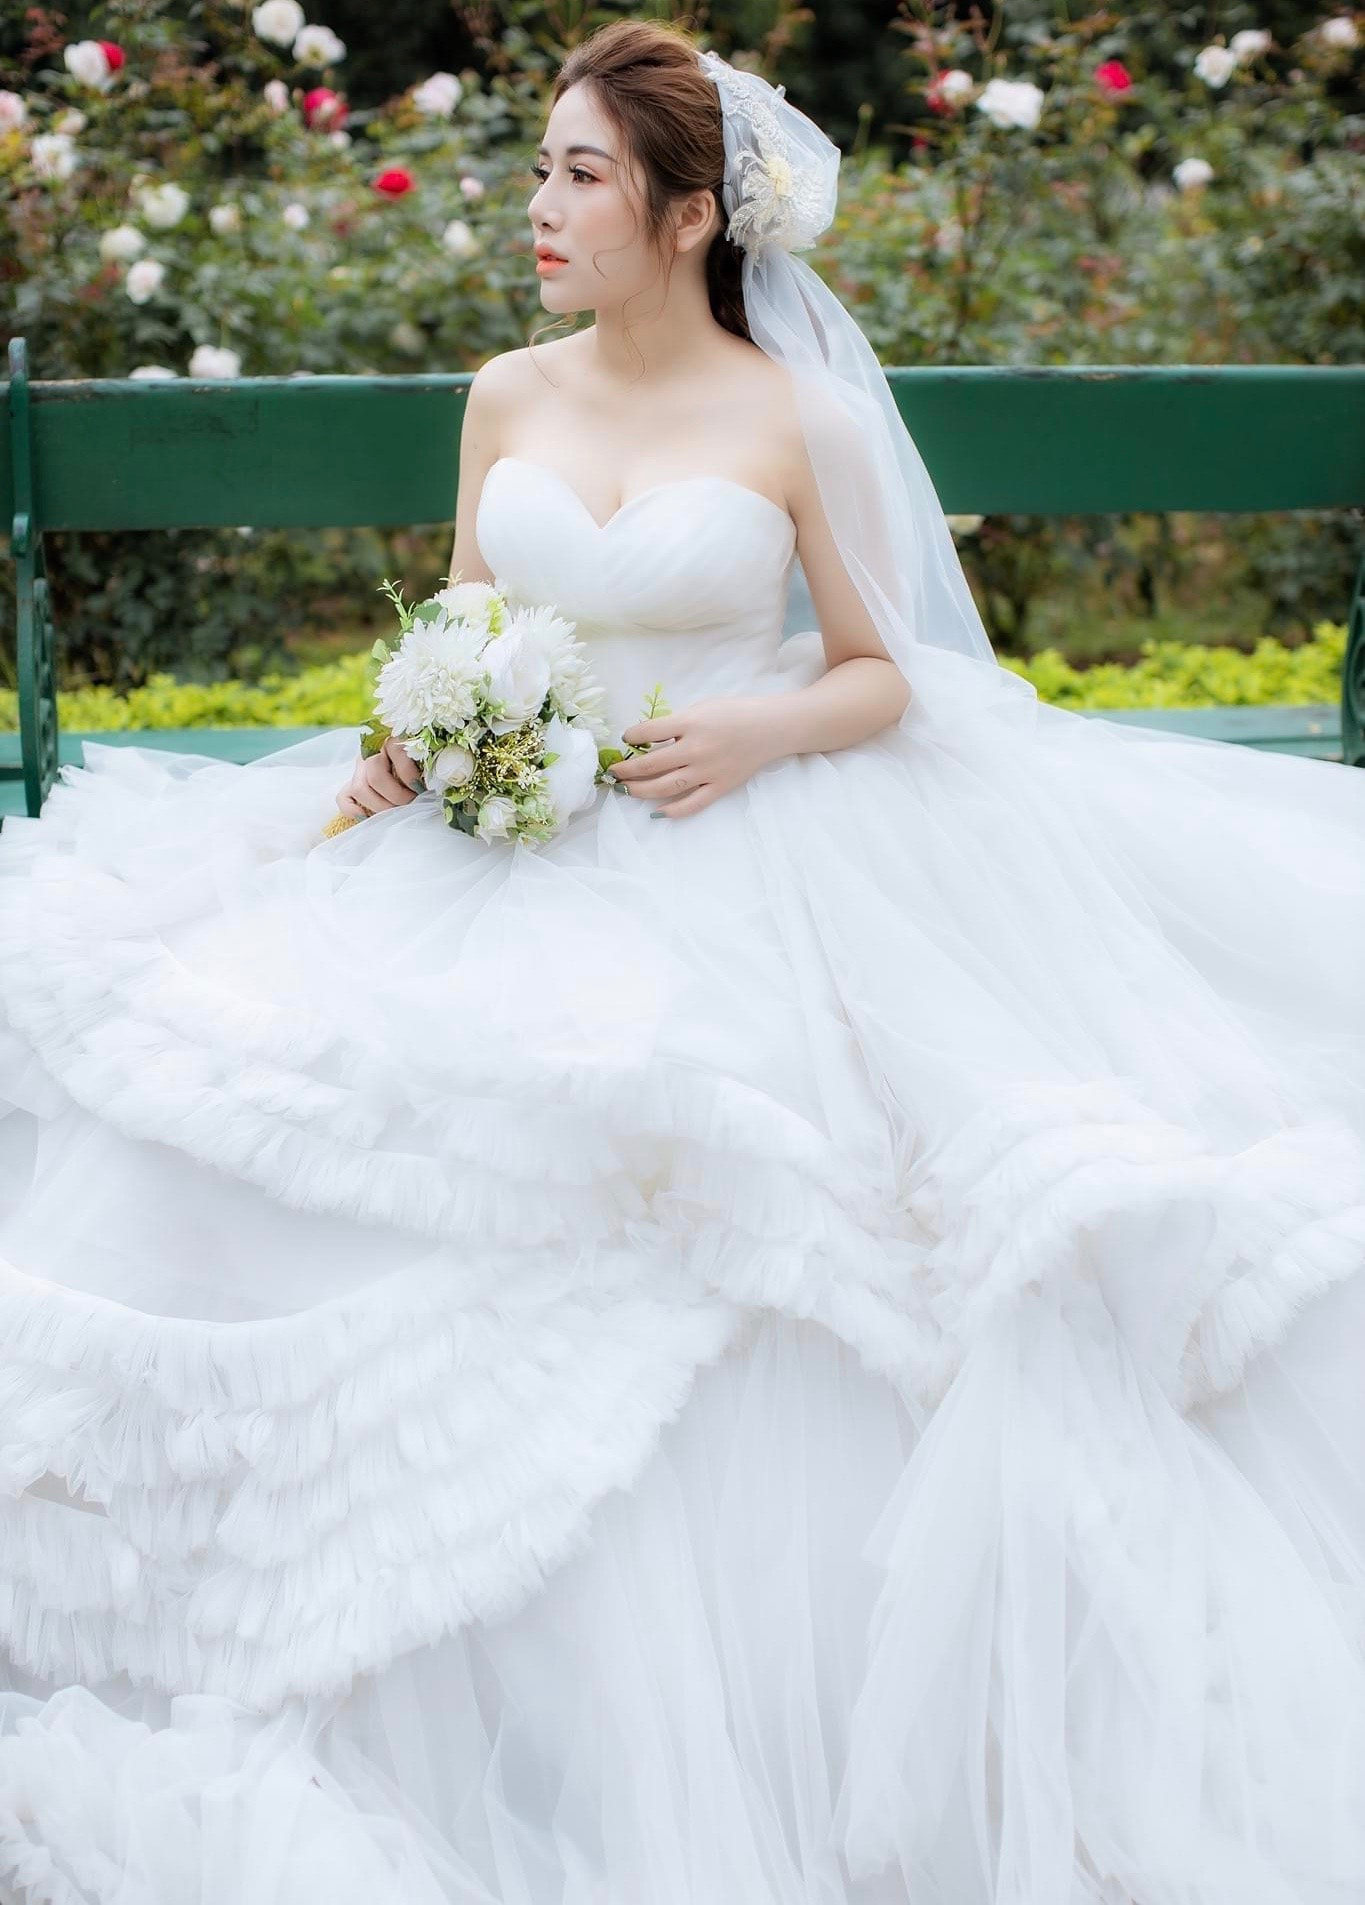 Kate | Wedding Gowns in Singapore | Bridefully Yours